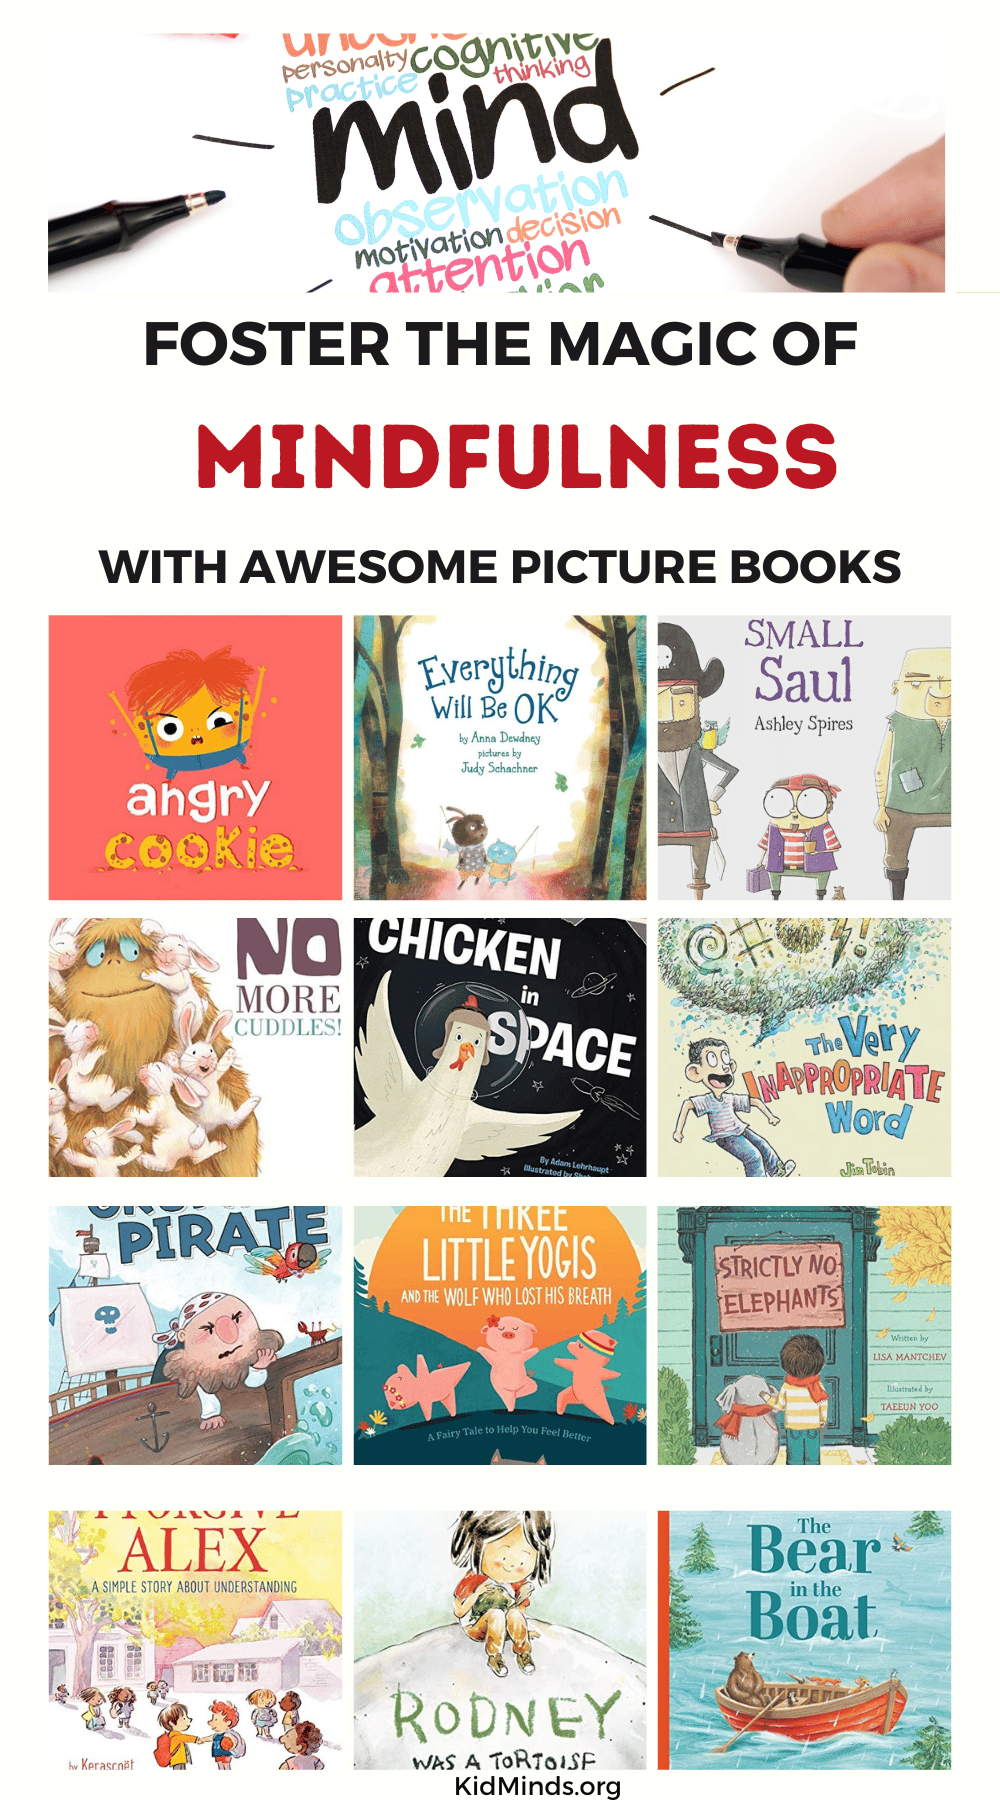 A fantastic collection of picture books about mindfulness and meditation to start a meaningful discussion and put your children on the path of developing a mindful mindset. #kidsbooks #raisingreaders #mindfulness #picturebooks #kidlit #storytime #kidminds